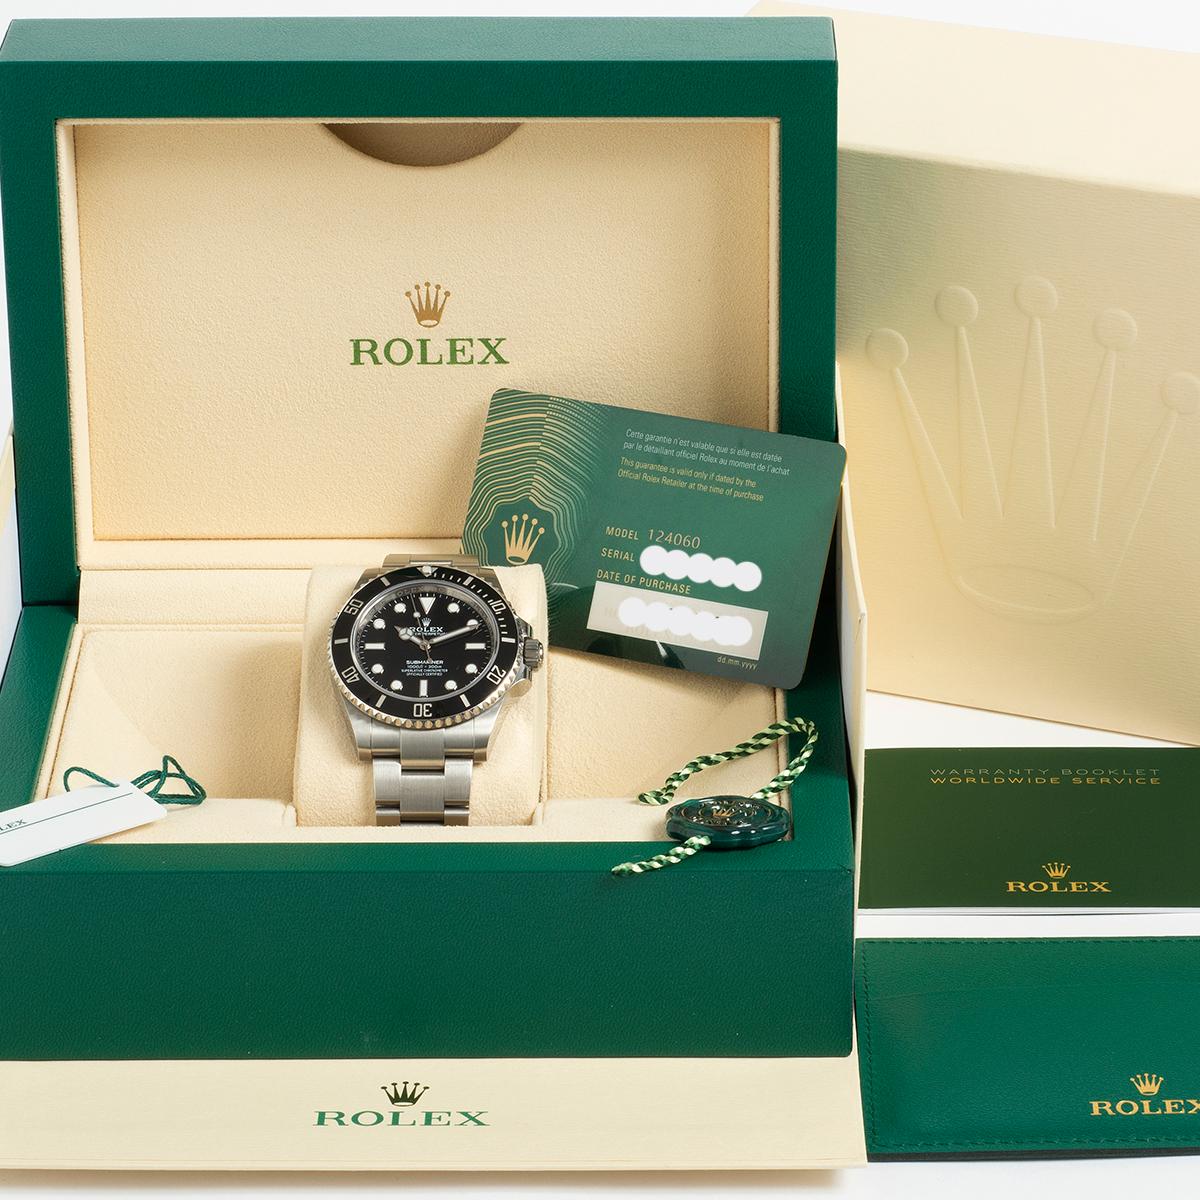 Our Rolex Submariner ( Submariner no date) reference 124060 features a 41mm stainless steel case with stainless steel bracelet with easy glide clasp with flip lock. This is a lightly used example of the latest Submariner and is presented in